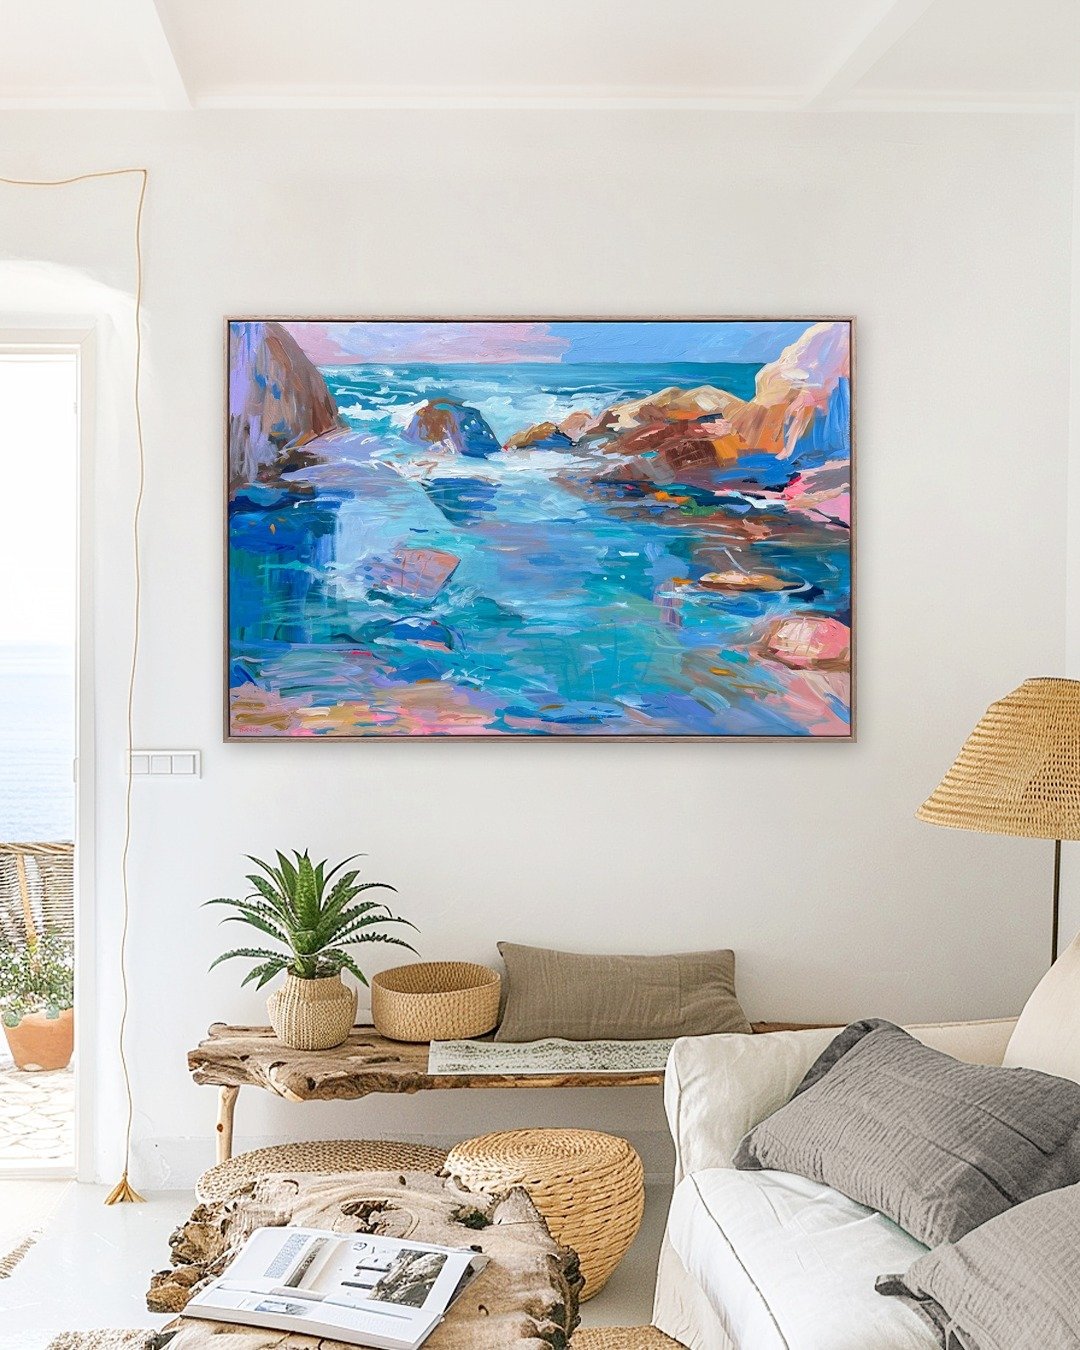 T H E O C E A N C A L L S

Blue crush on canvas, crisp white walls, and the earthy kiss of wood&mdash;one of my fave combos 👌

Wouldn't mind diving into this scene right now! 😌

Cheers to the weekend friends!

♡ Honor

Push Me, Pull Me
93 x 63 cm f